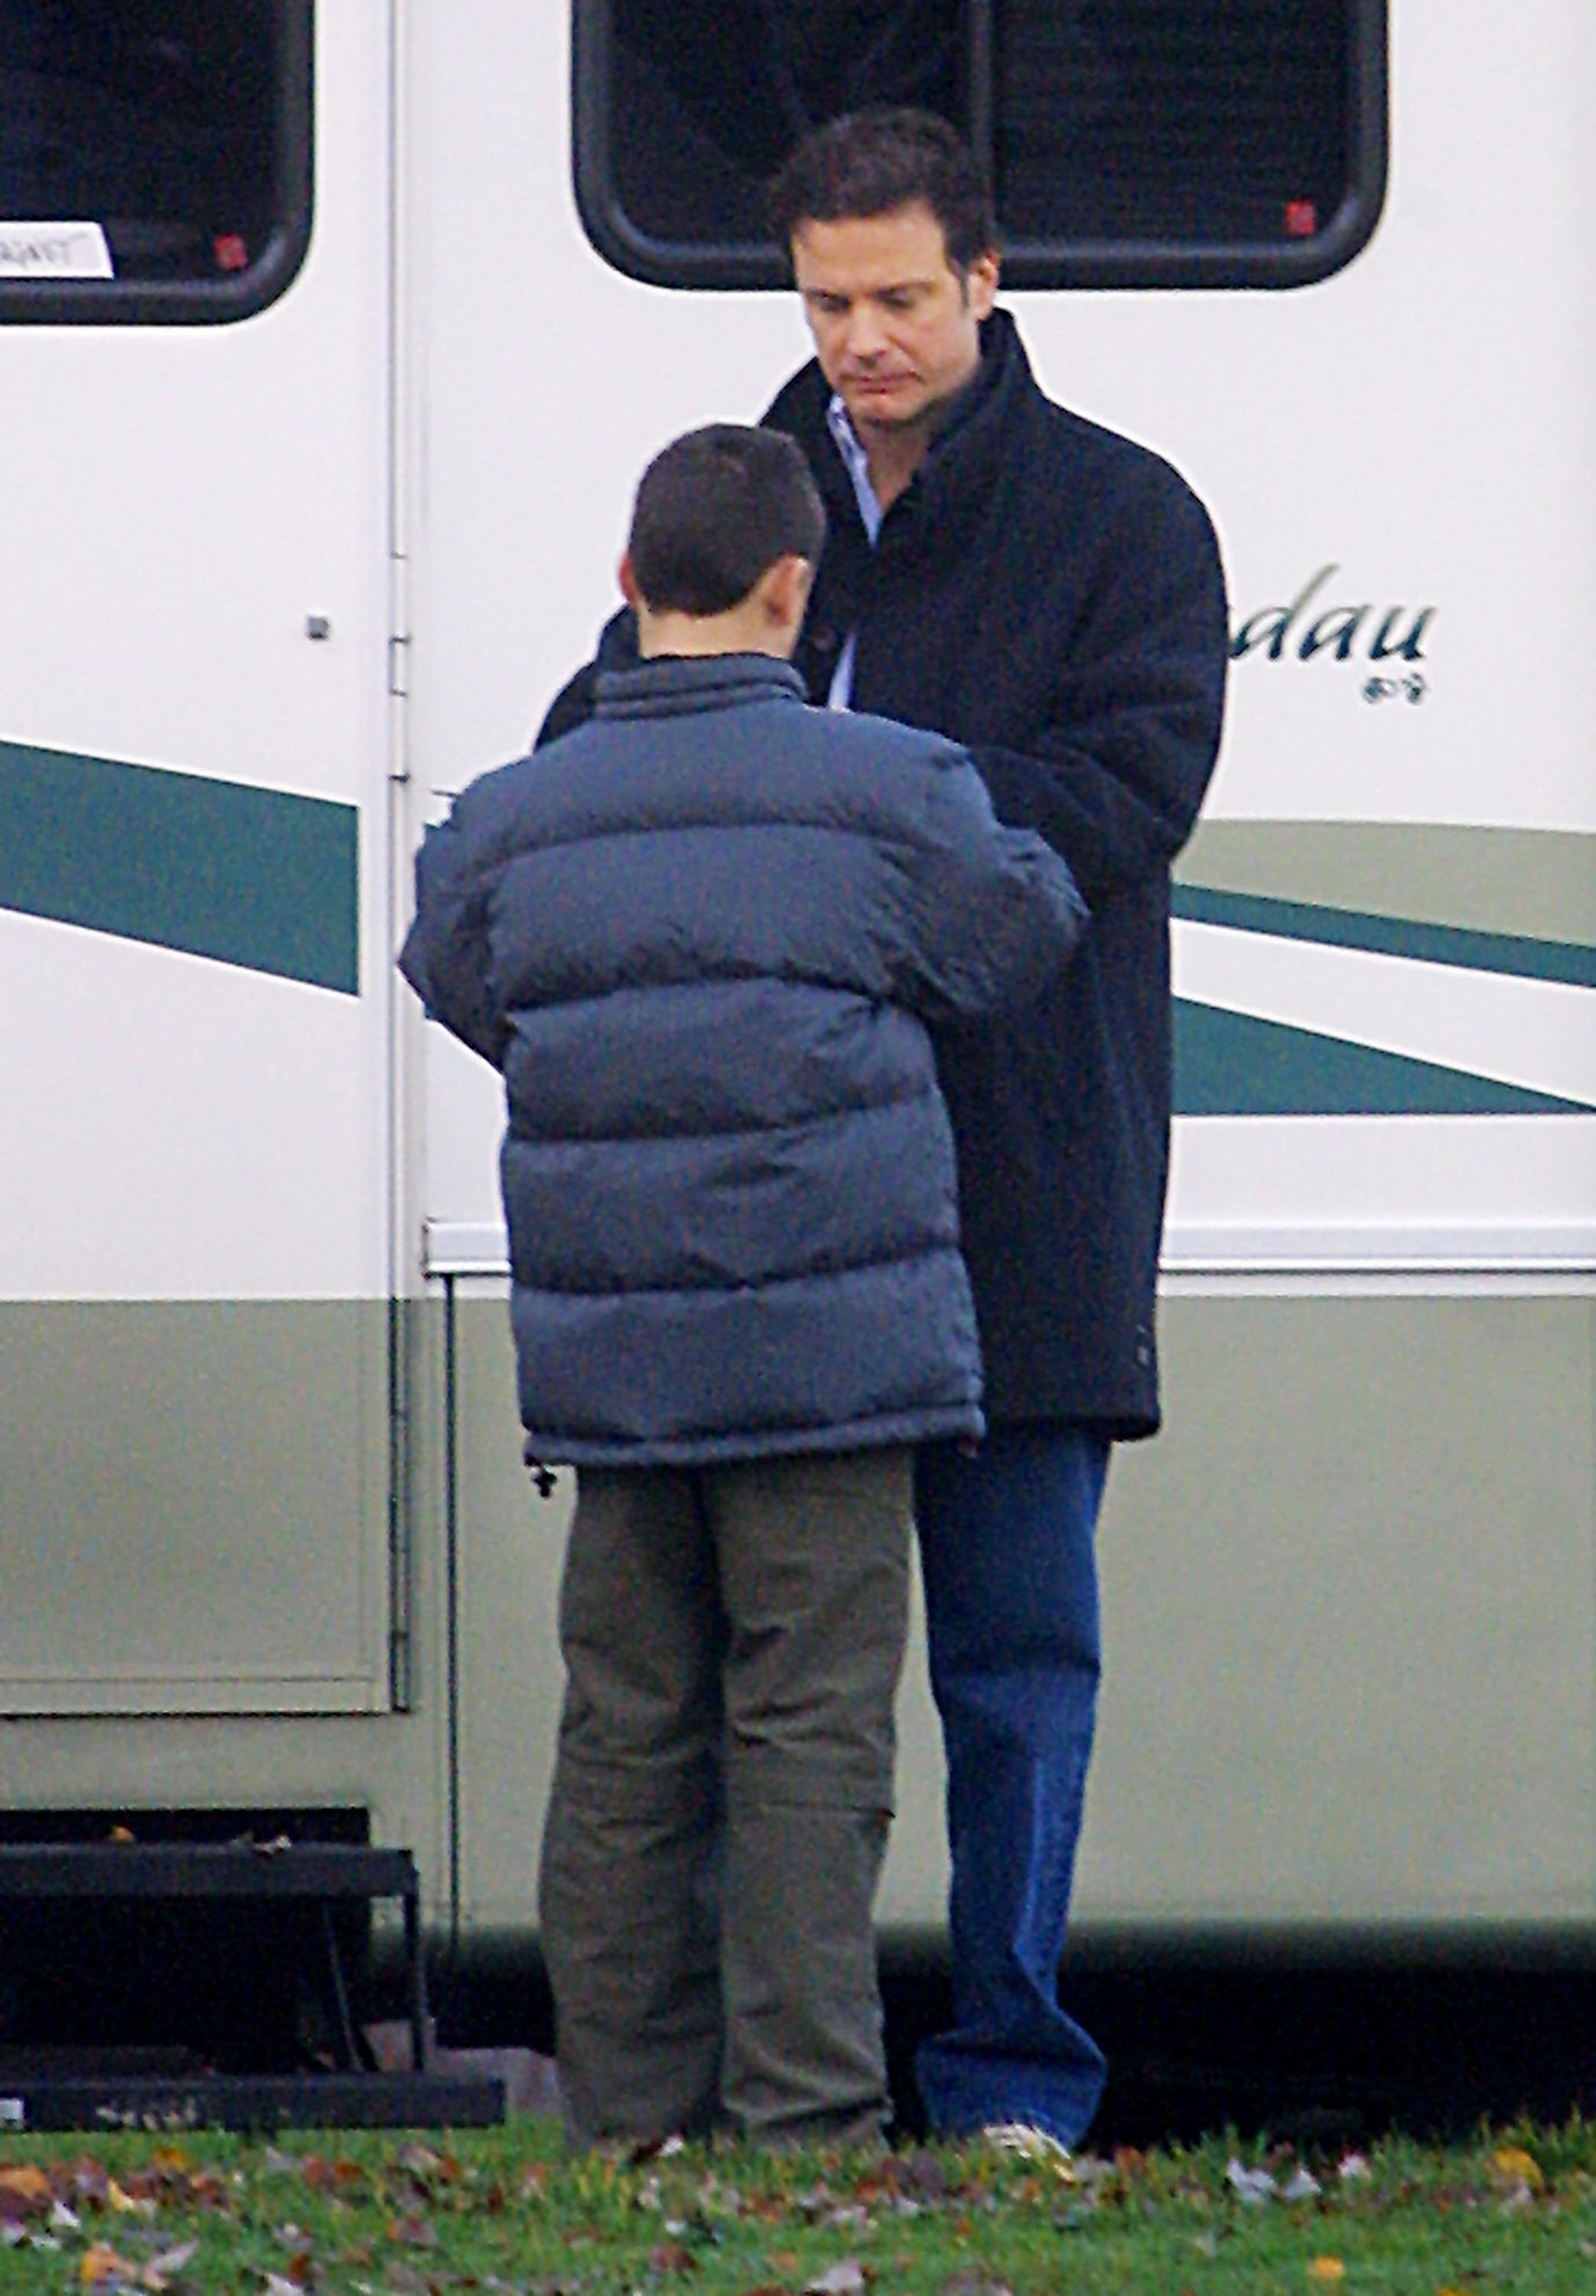 Colin Firth and his son Will Firth stand outside the trailer on the set of "New Cardiff" November 26, 2001, in Vancouver, British Columbia. | Source: Getty Images